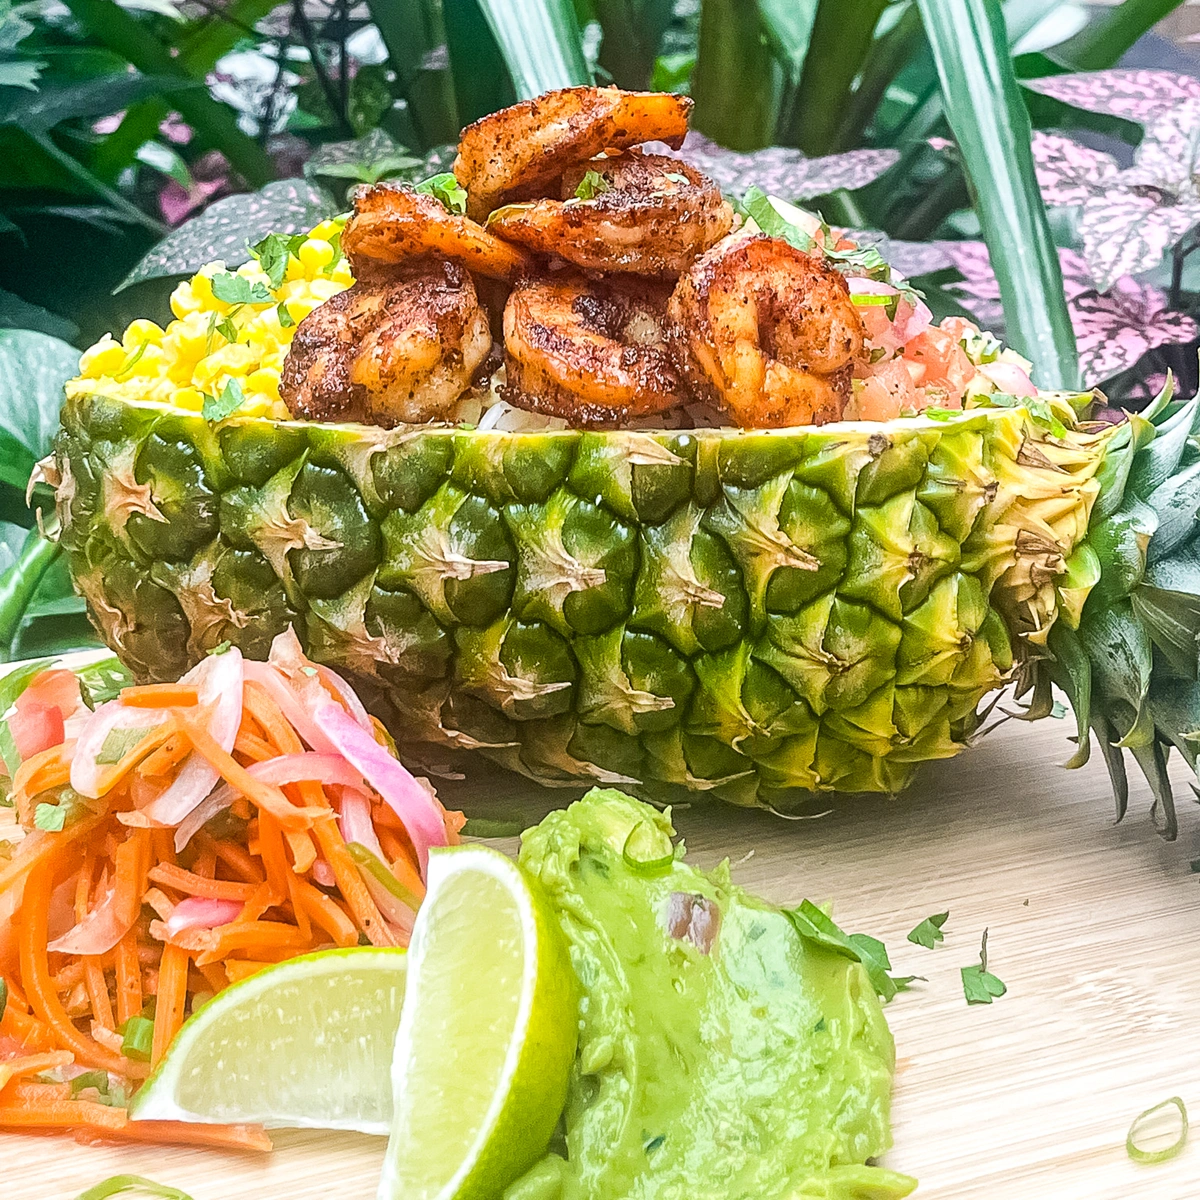 Shrimp served in a pineapple | Chef-Driven School Lunches Students will Love | ChefAdvantage